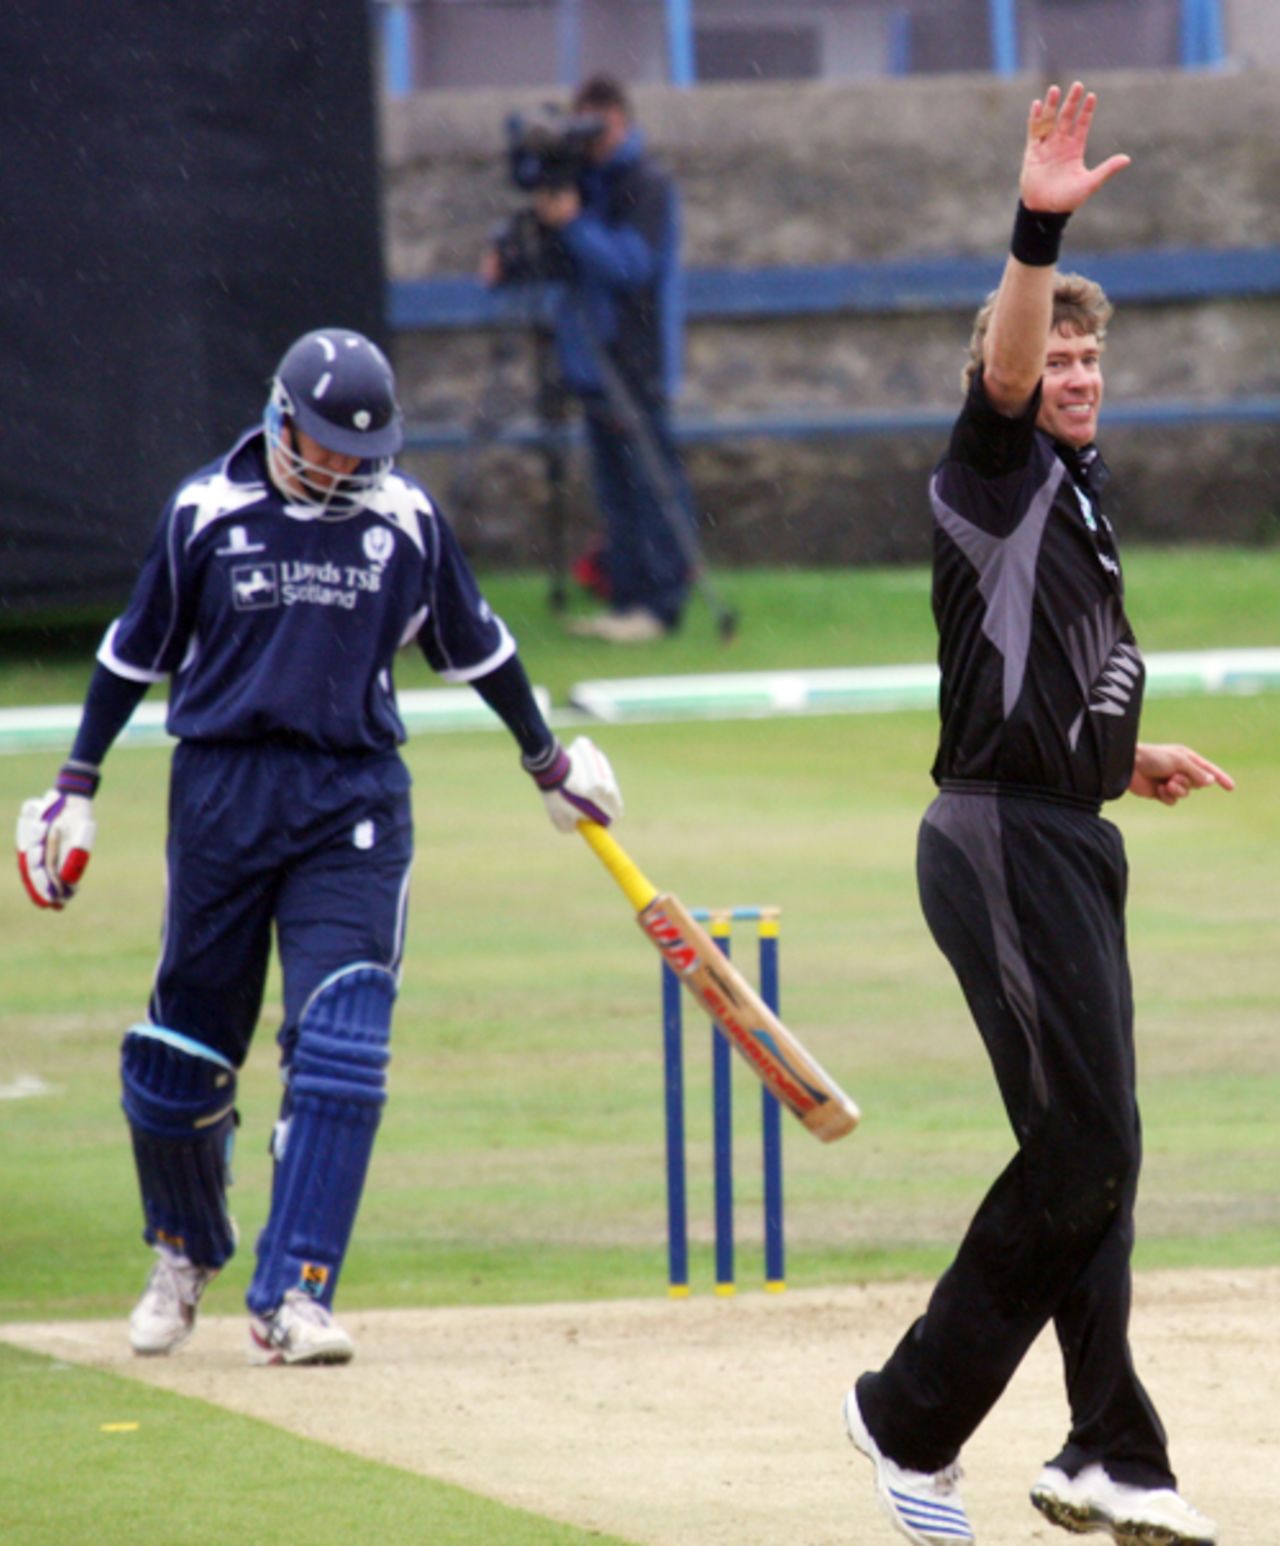 Jacob Oram has Colin Smith caught behind, Scotland v New Zealand, Tri-series, Aberdeen, July 3, 2008